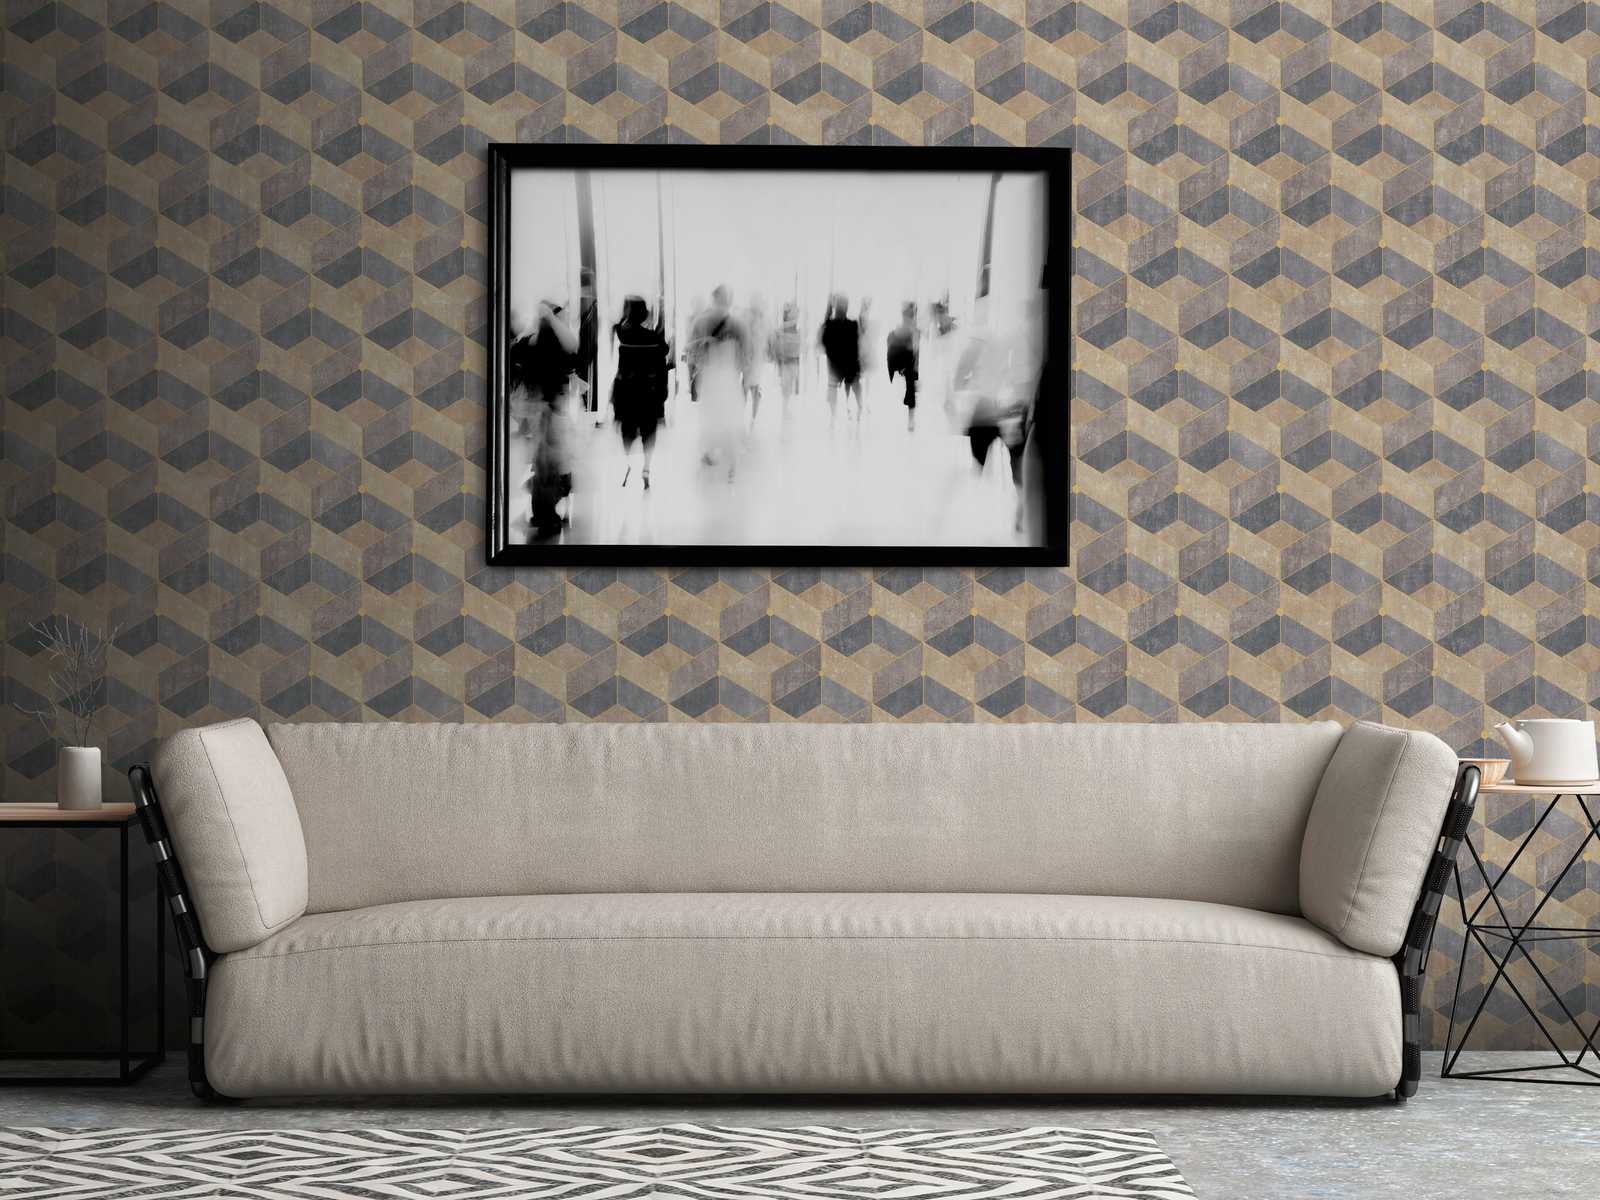             Graphic wallpaper with retro pattern & gold nude - brown, yellow, black
        